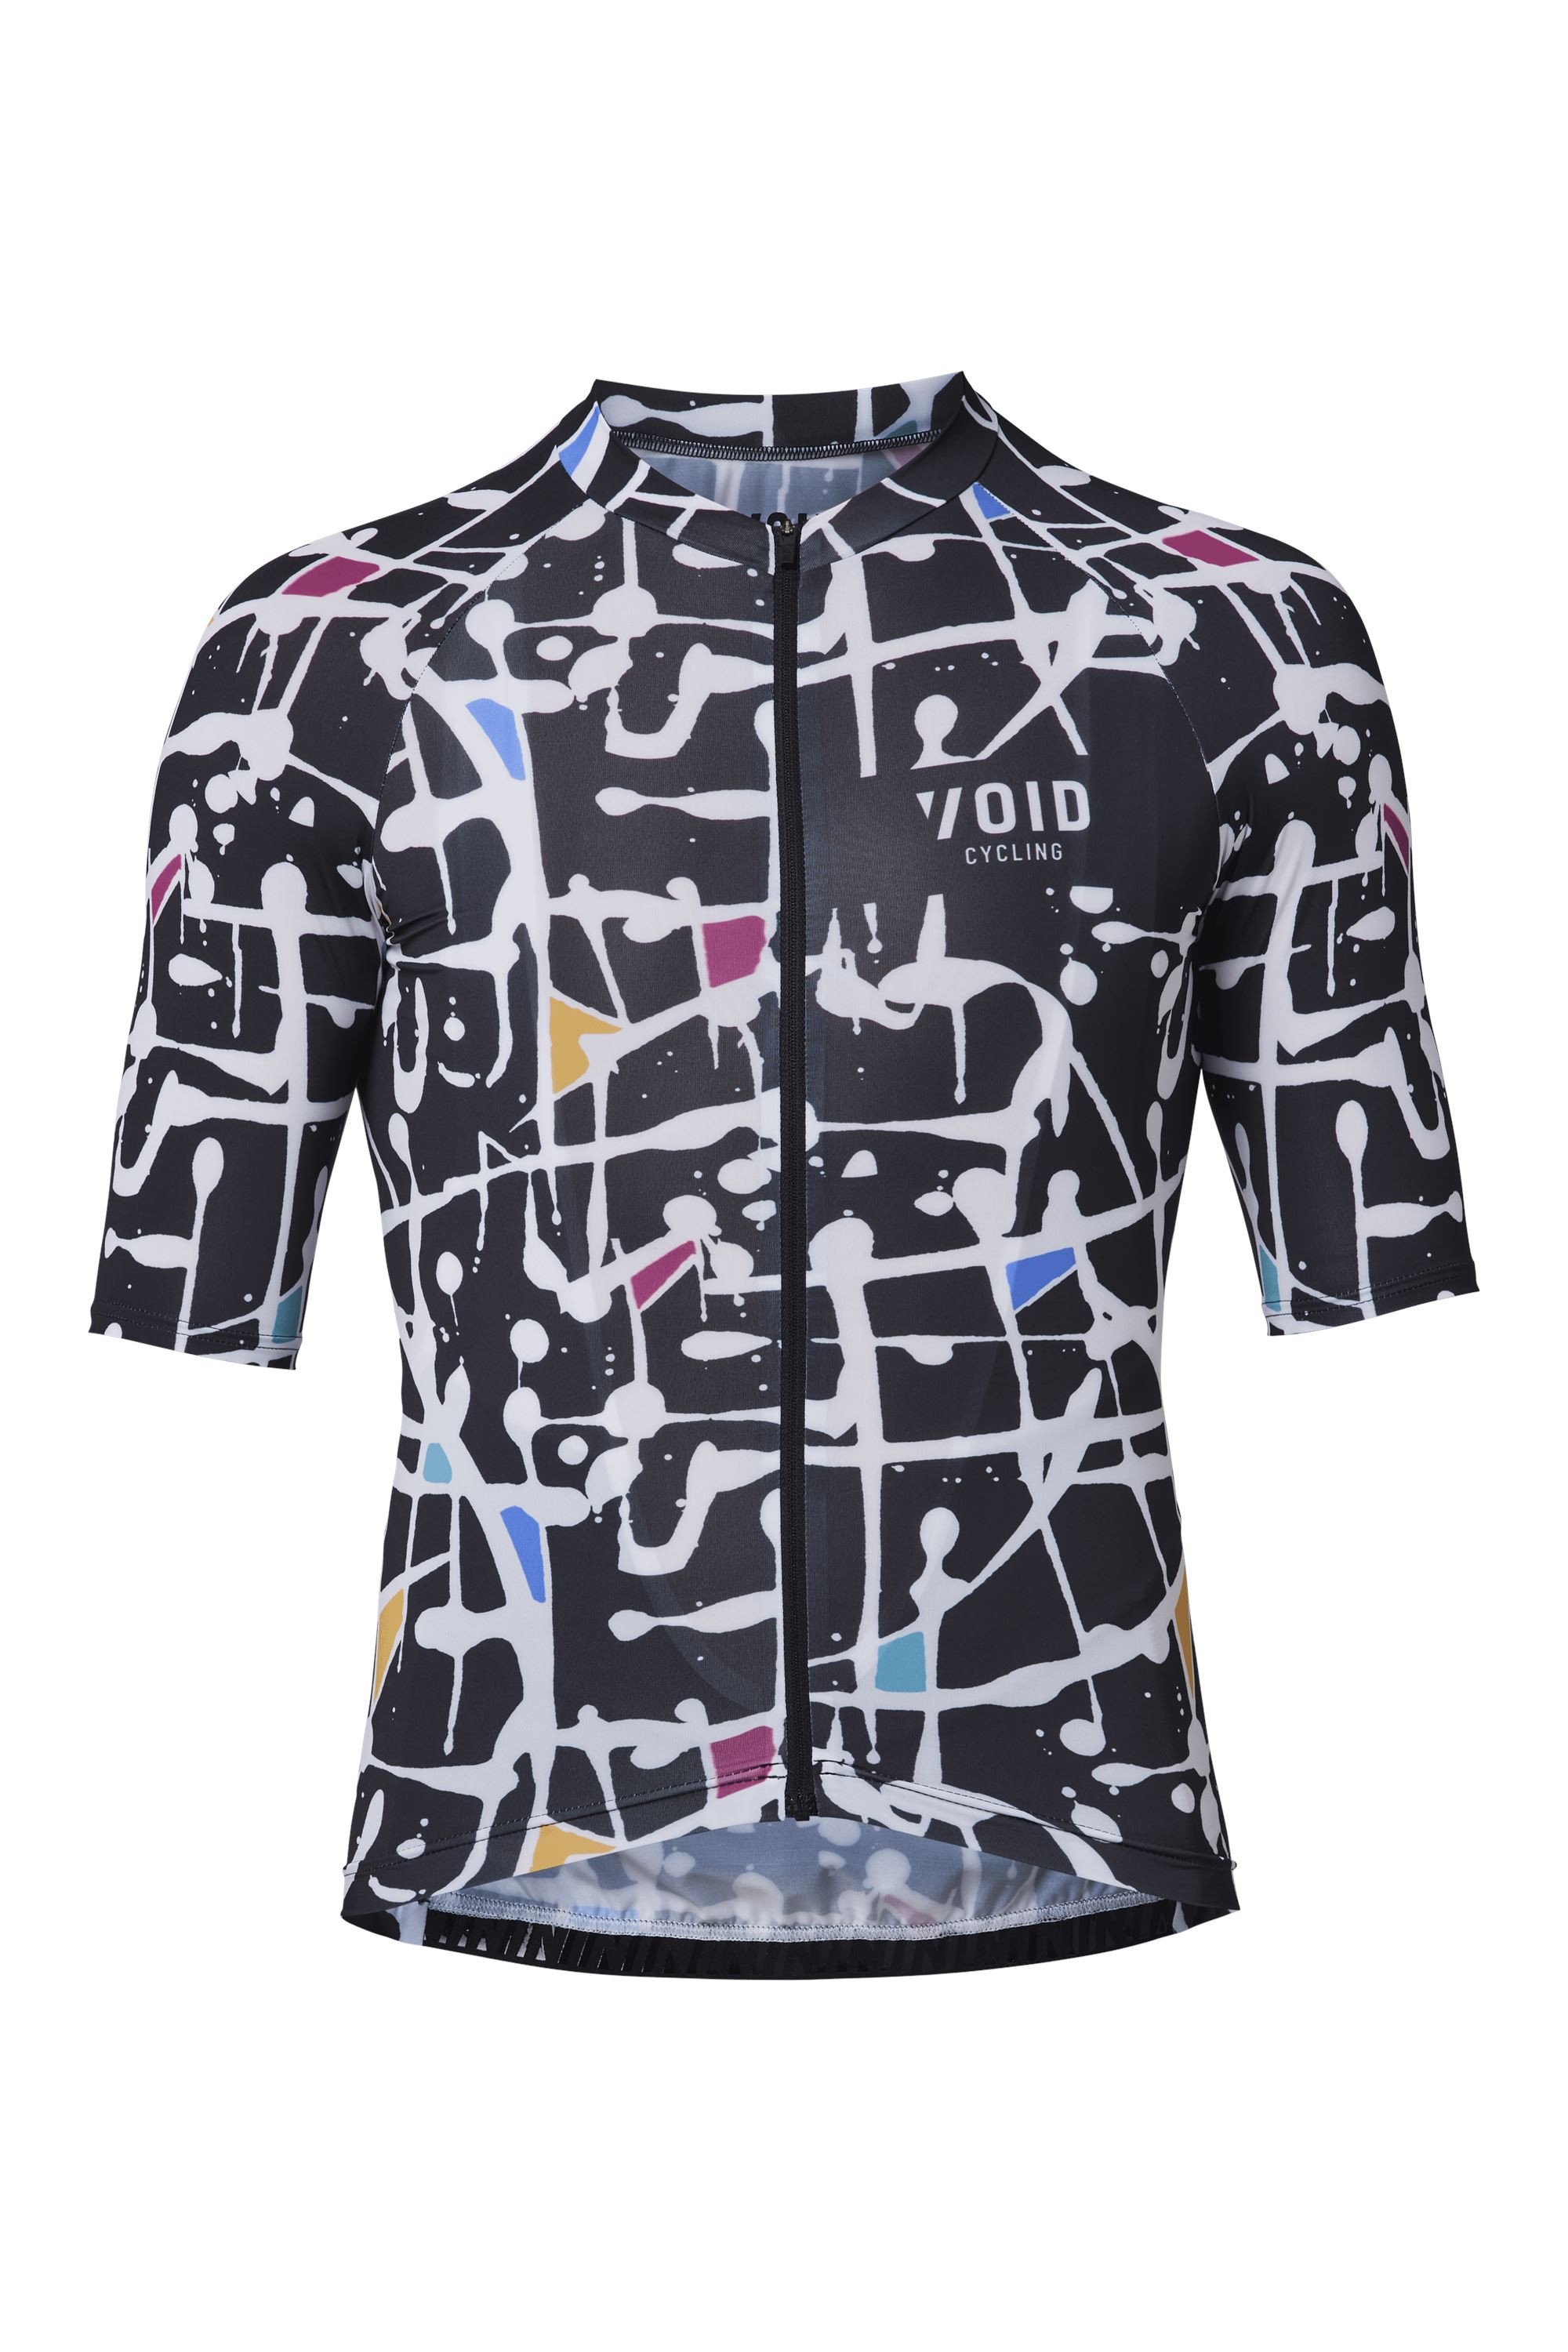 VOID ABSTRACT JERSEY BLACK